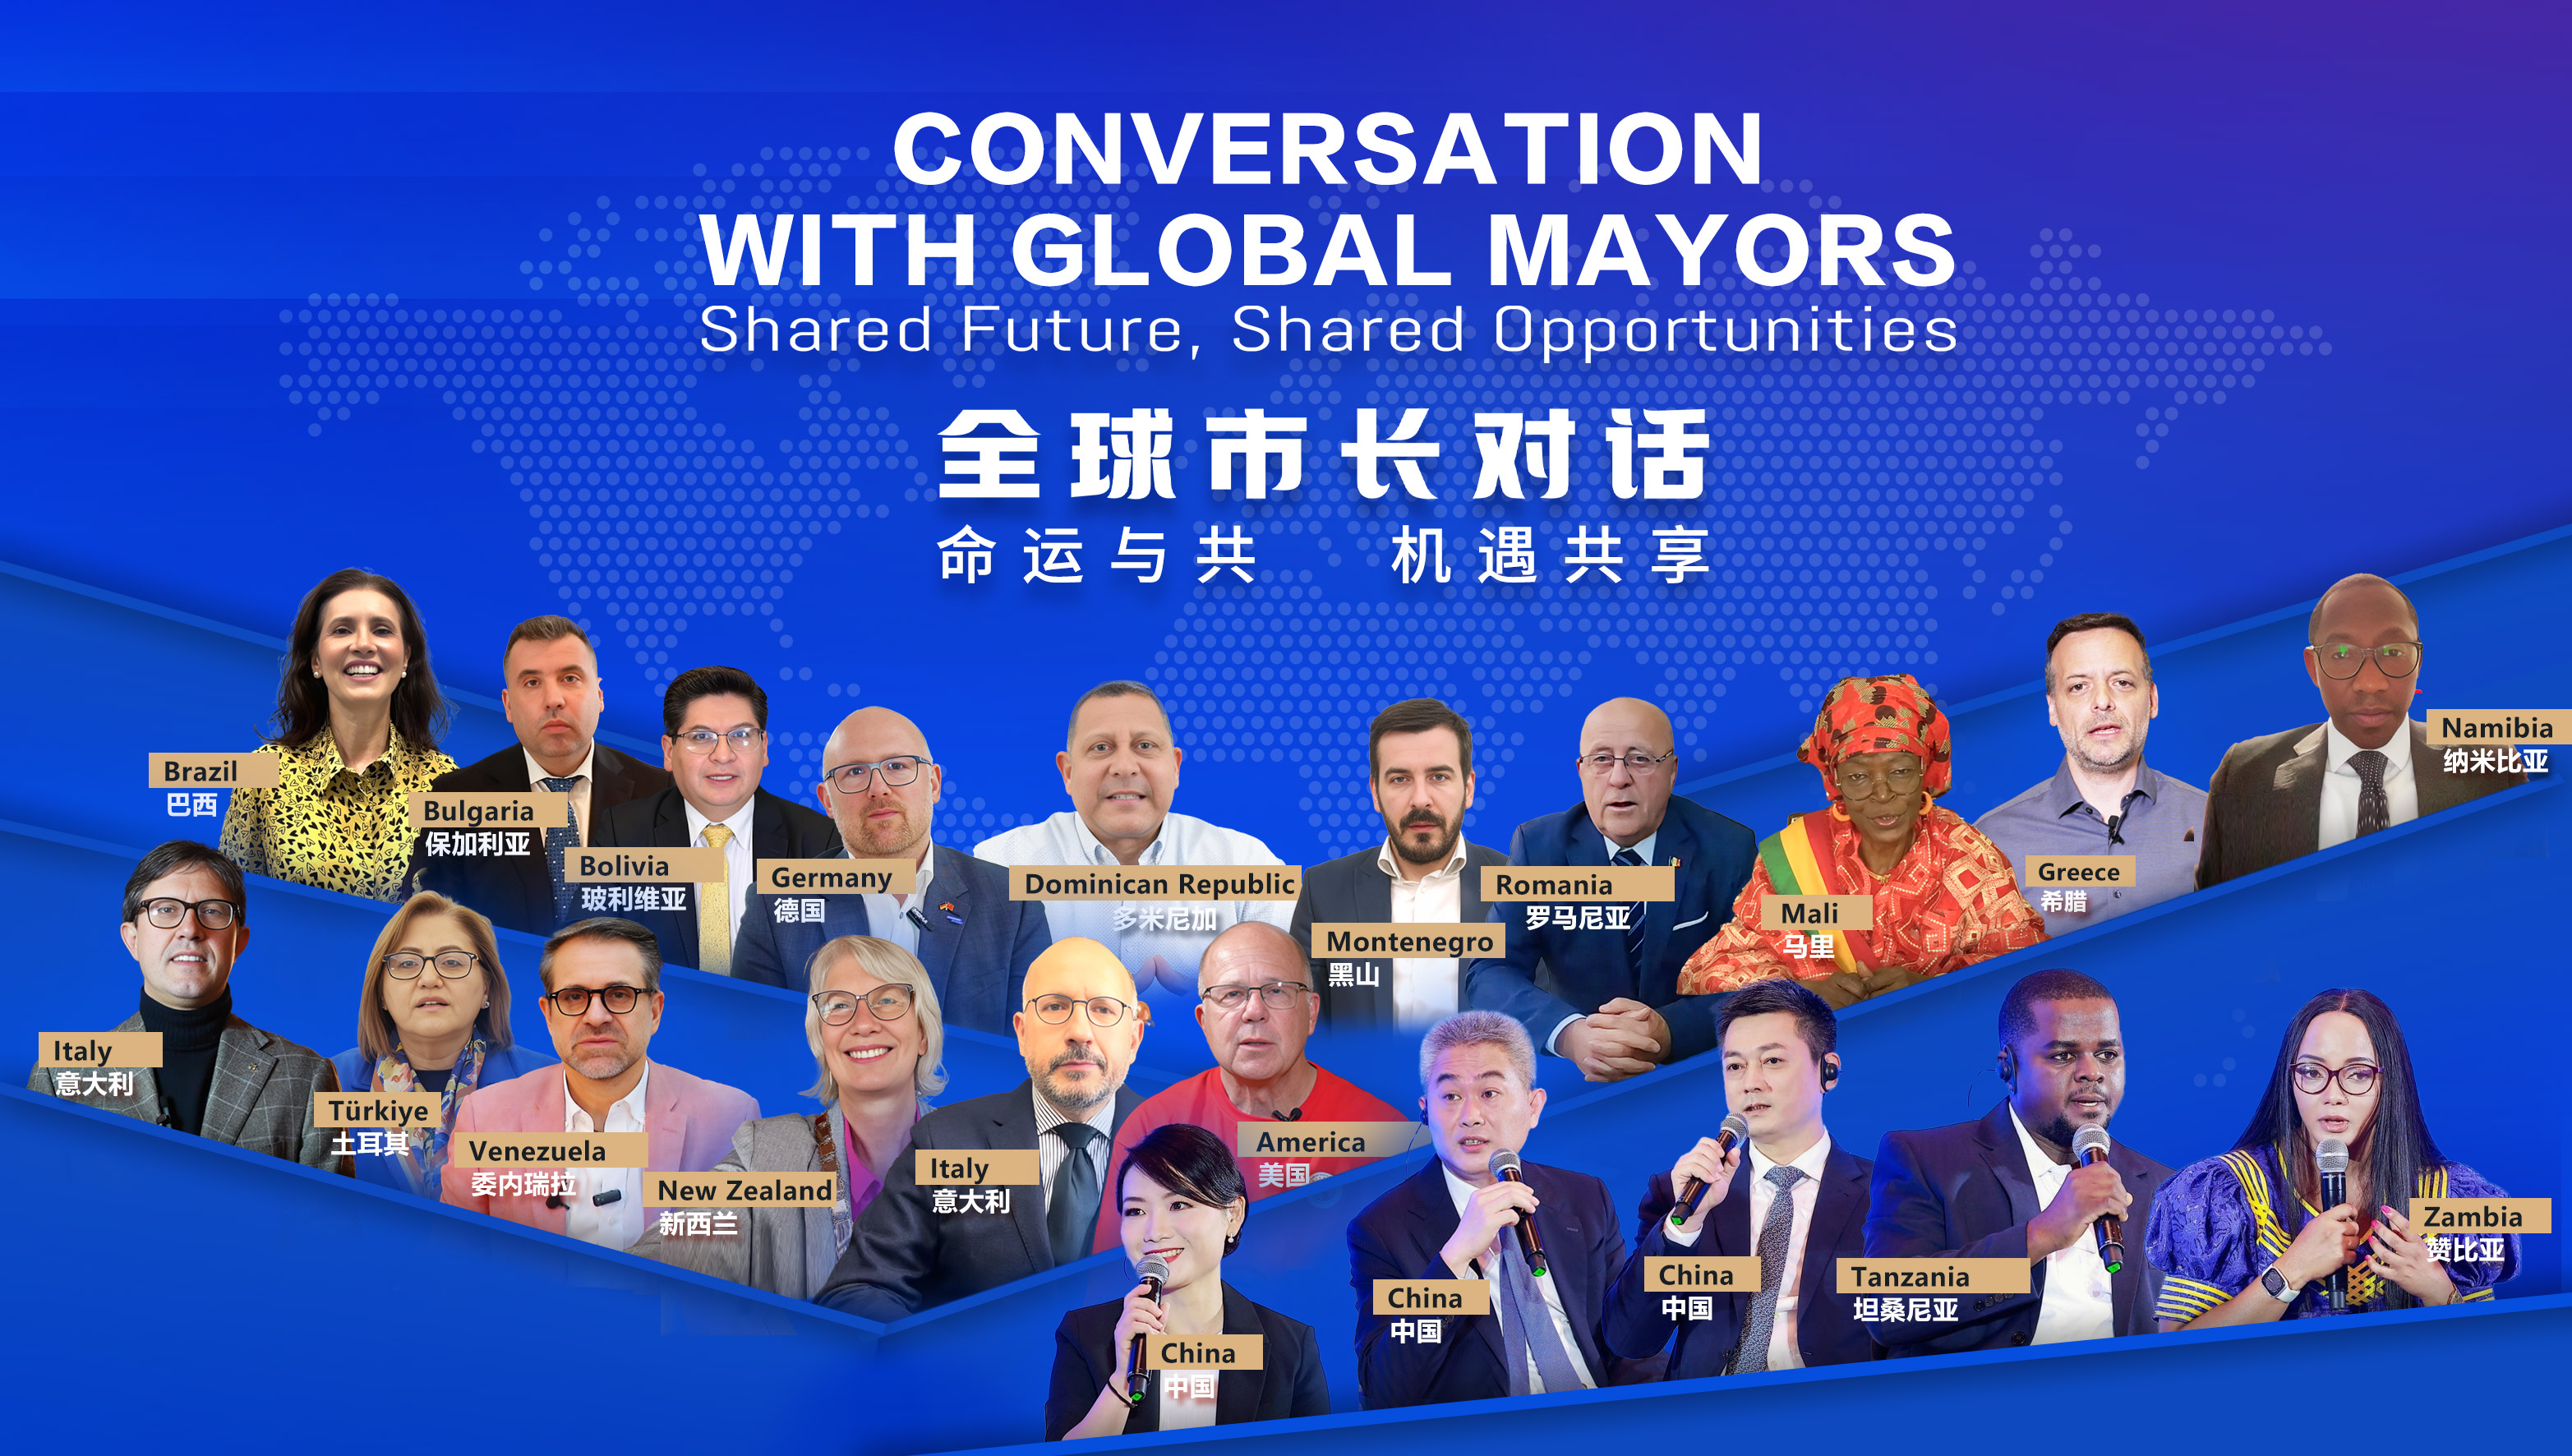 Live: Shared Future, Shared Opportunities – Conversation with Global Mayors